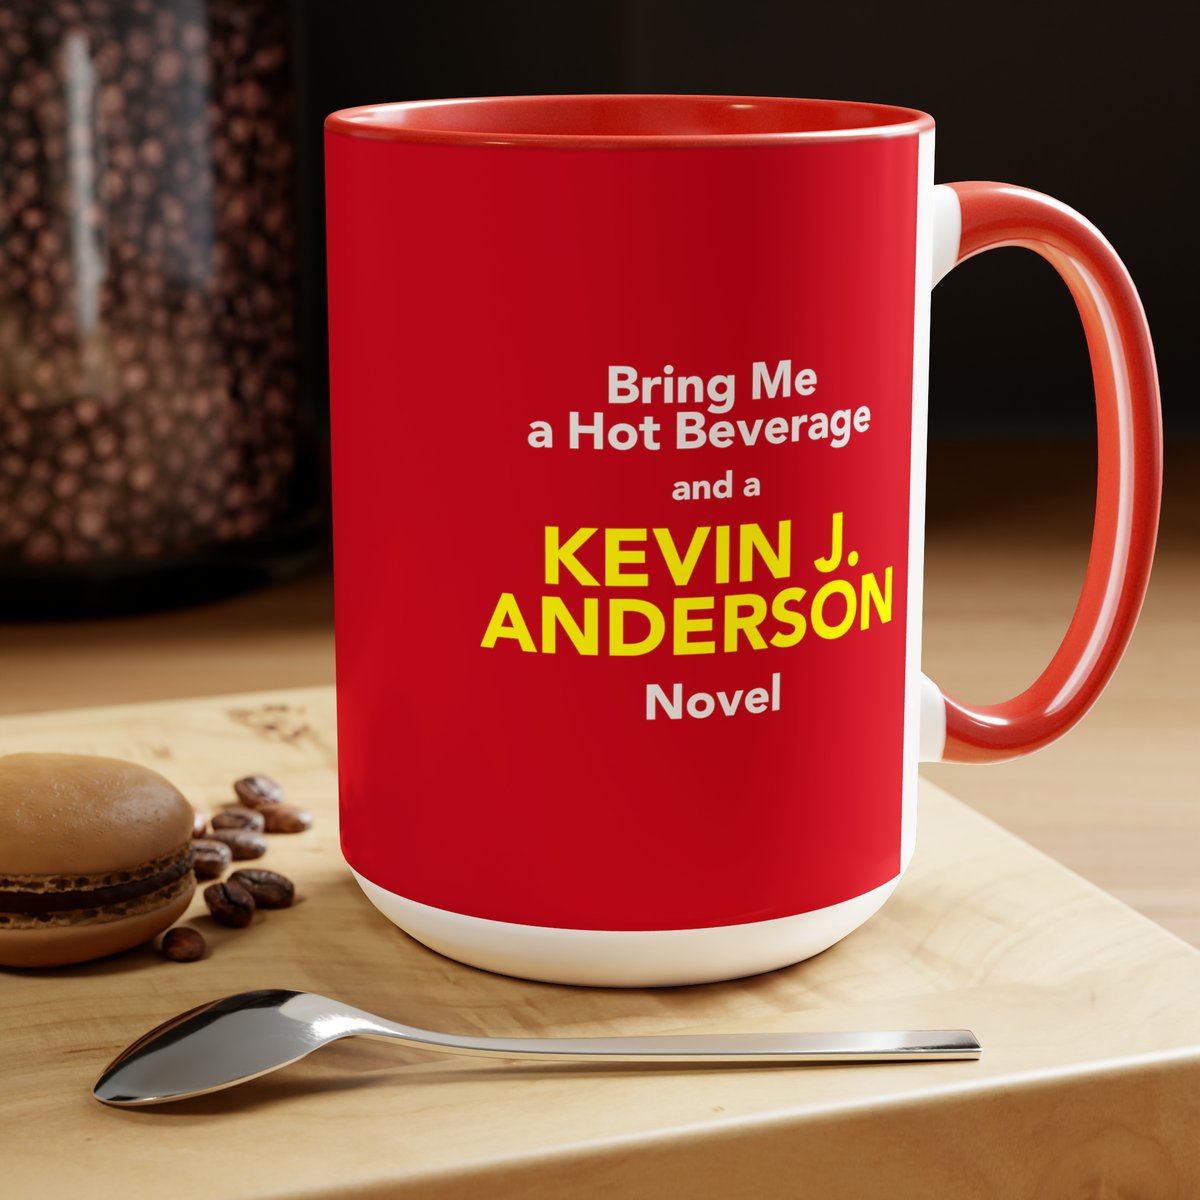 Start your Sunday morning with a nice hot beverage ... but it goes better with reading if you have a special KJA mug. These are only available as part of my Short Fiction Library Kickstarter. kickstarter.com/projects/thekj…